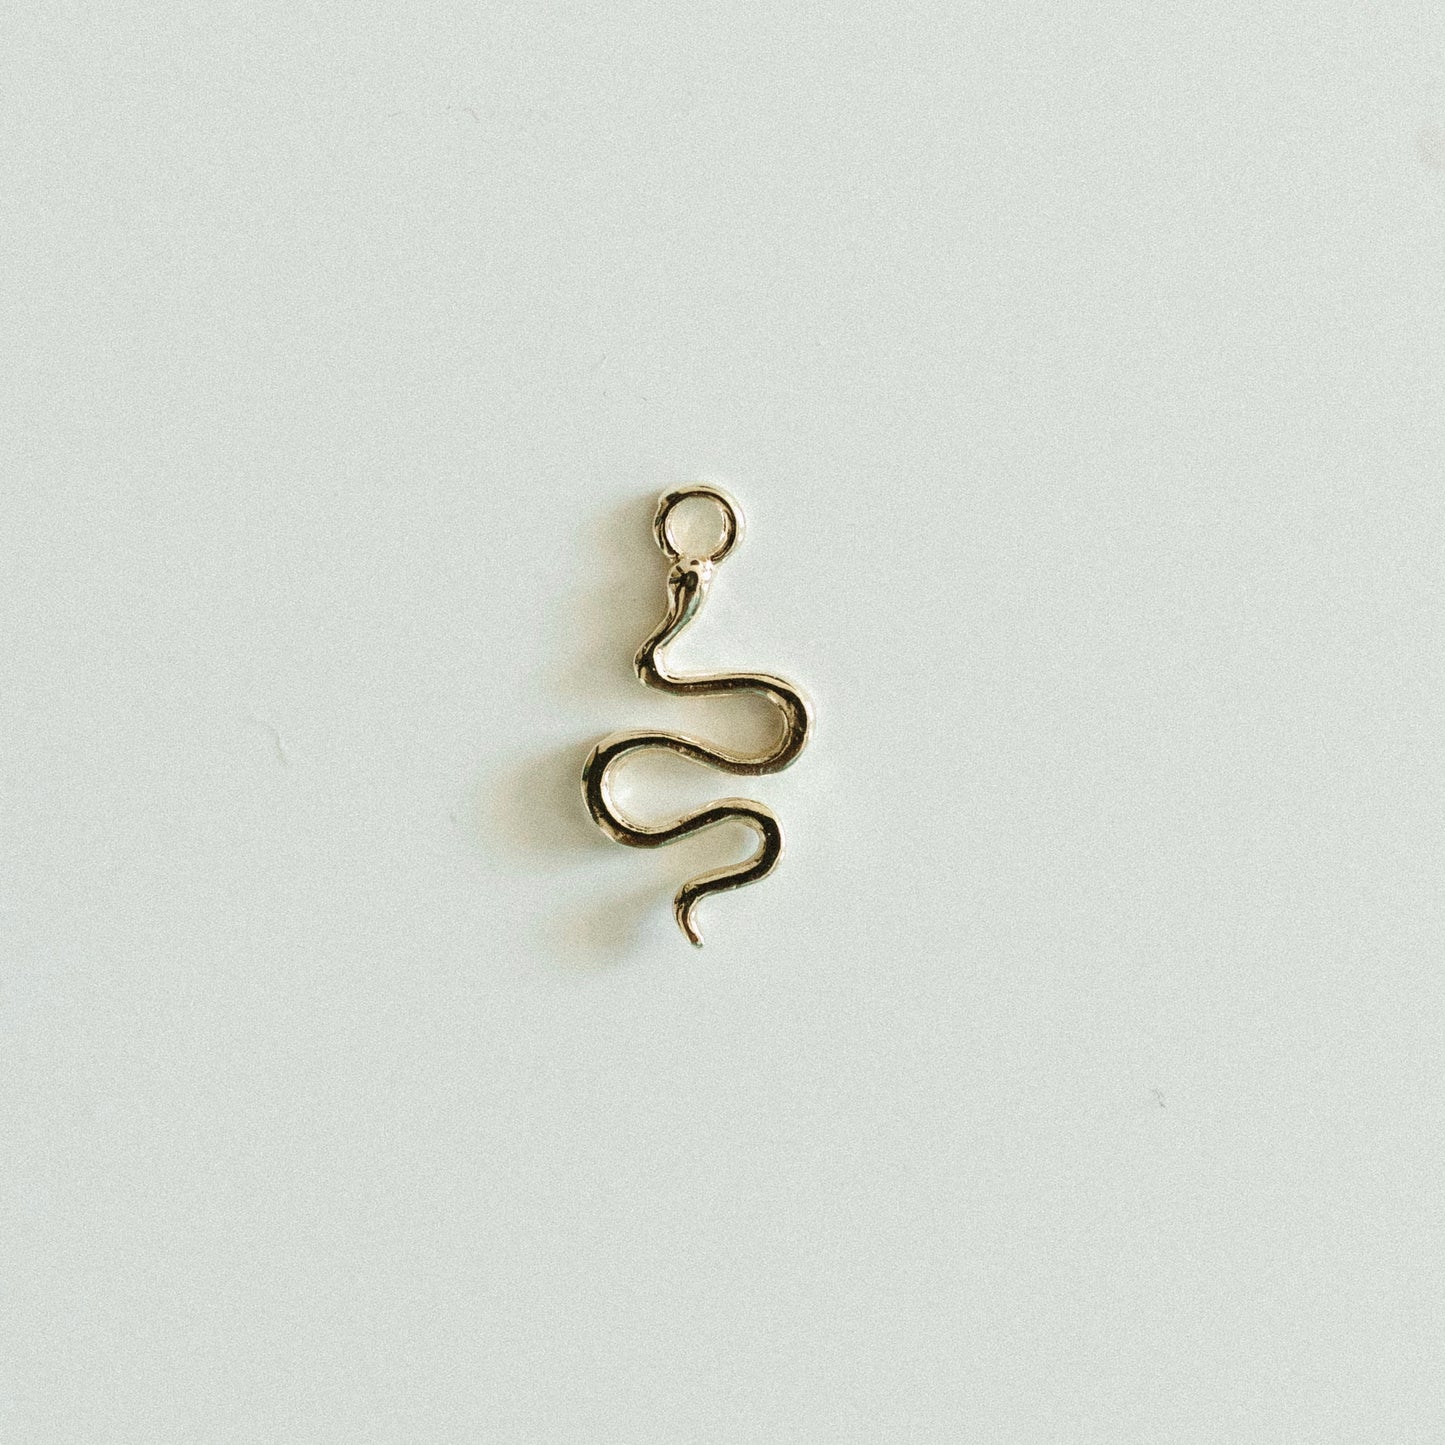 Small gold snake